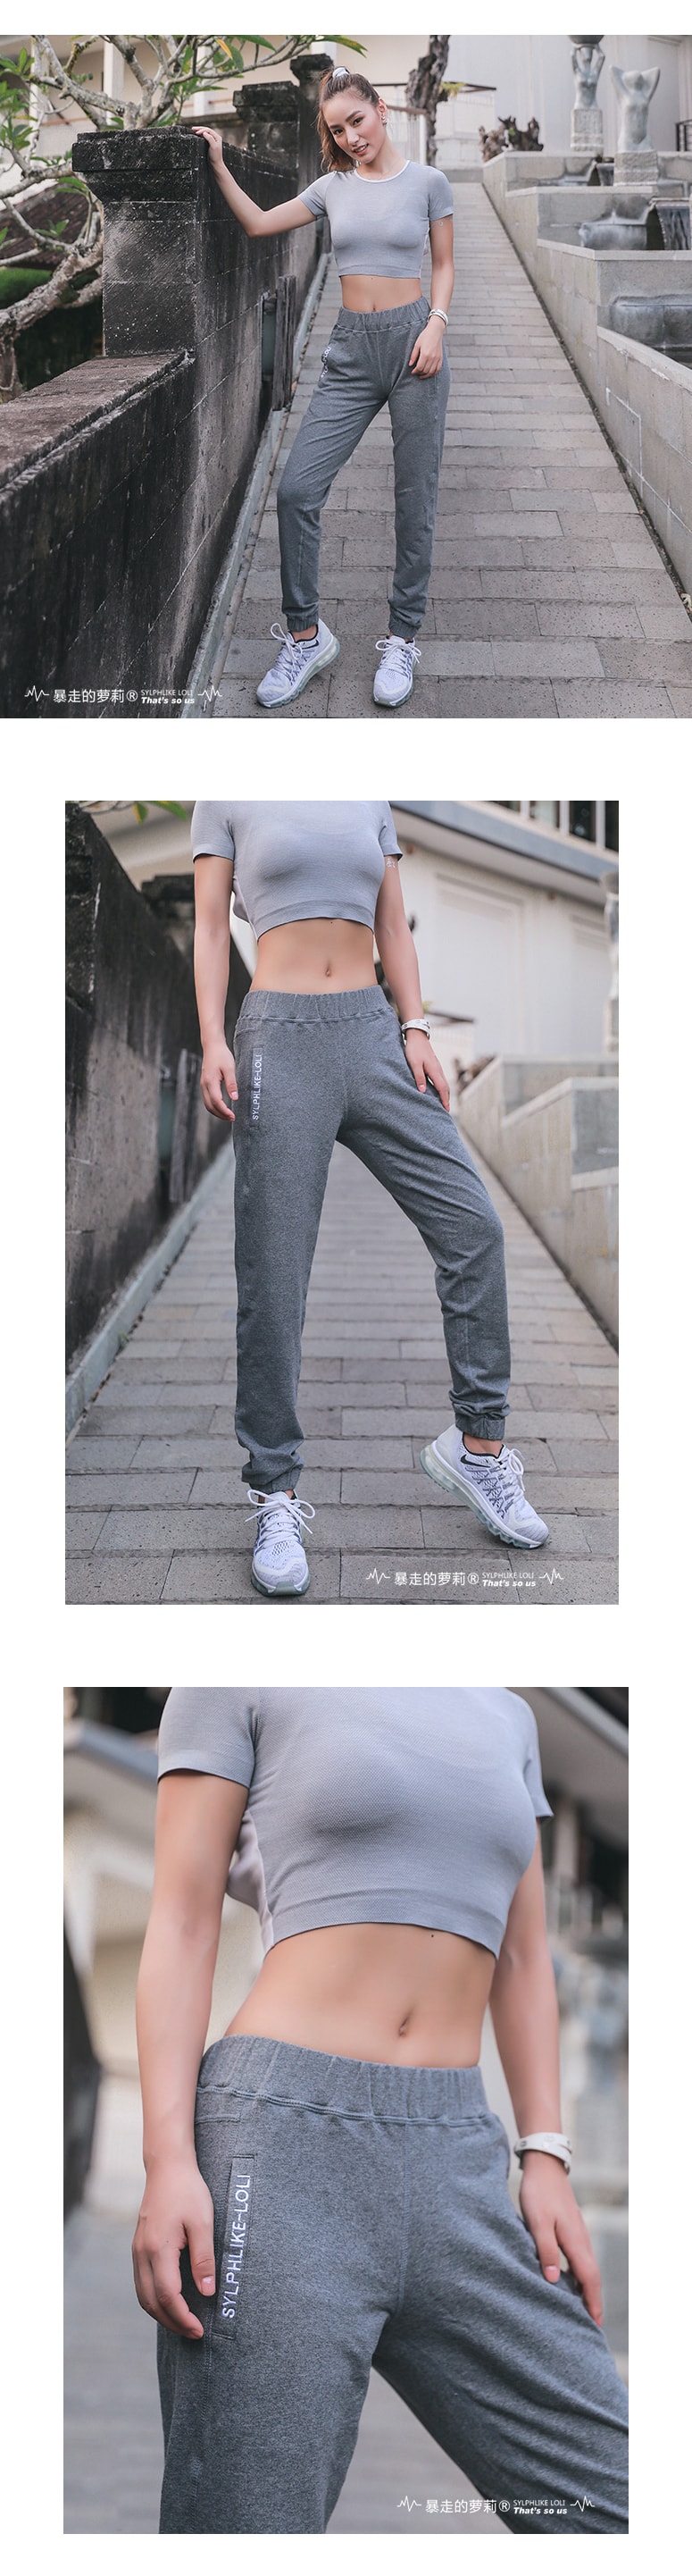 Sports Loose Leisure Pants For Running Yoga Fitness Train Outdoor/Grey#/L